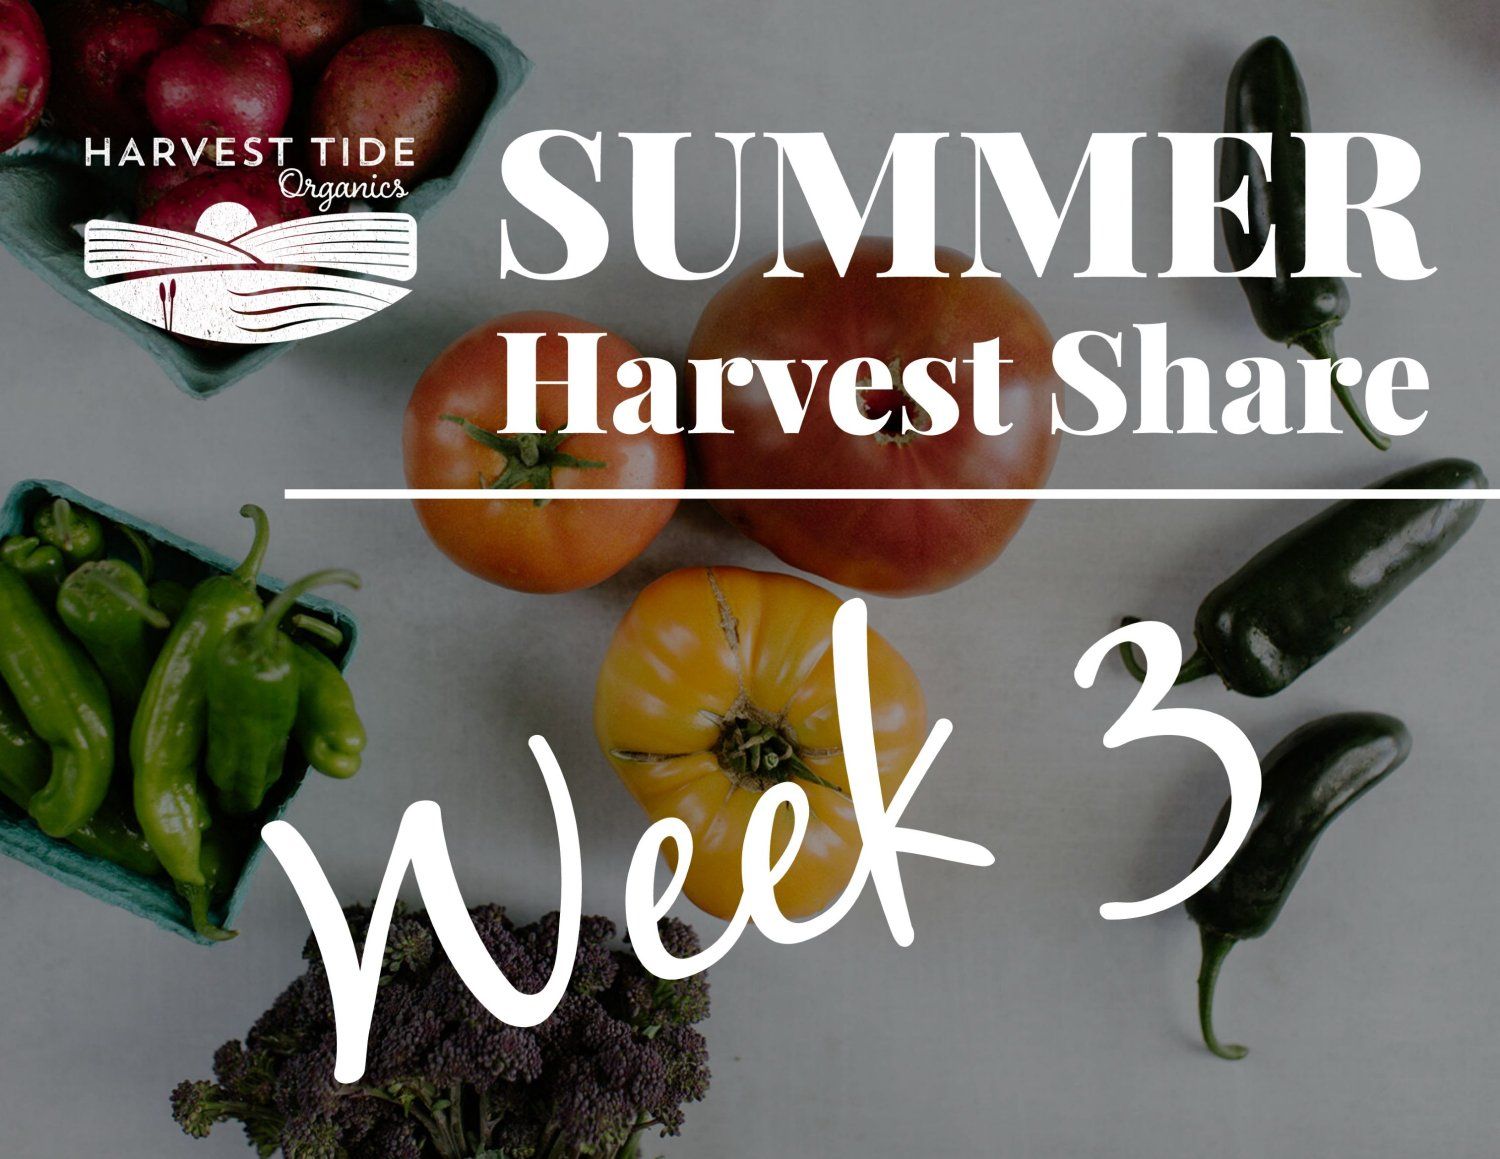 Previous Happening: Week 3 of your CSA and 4 Days until the official first day of Summer!